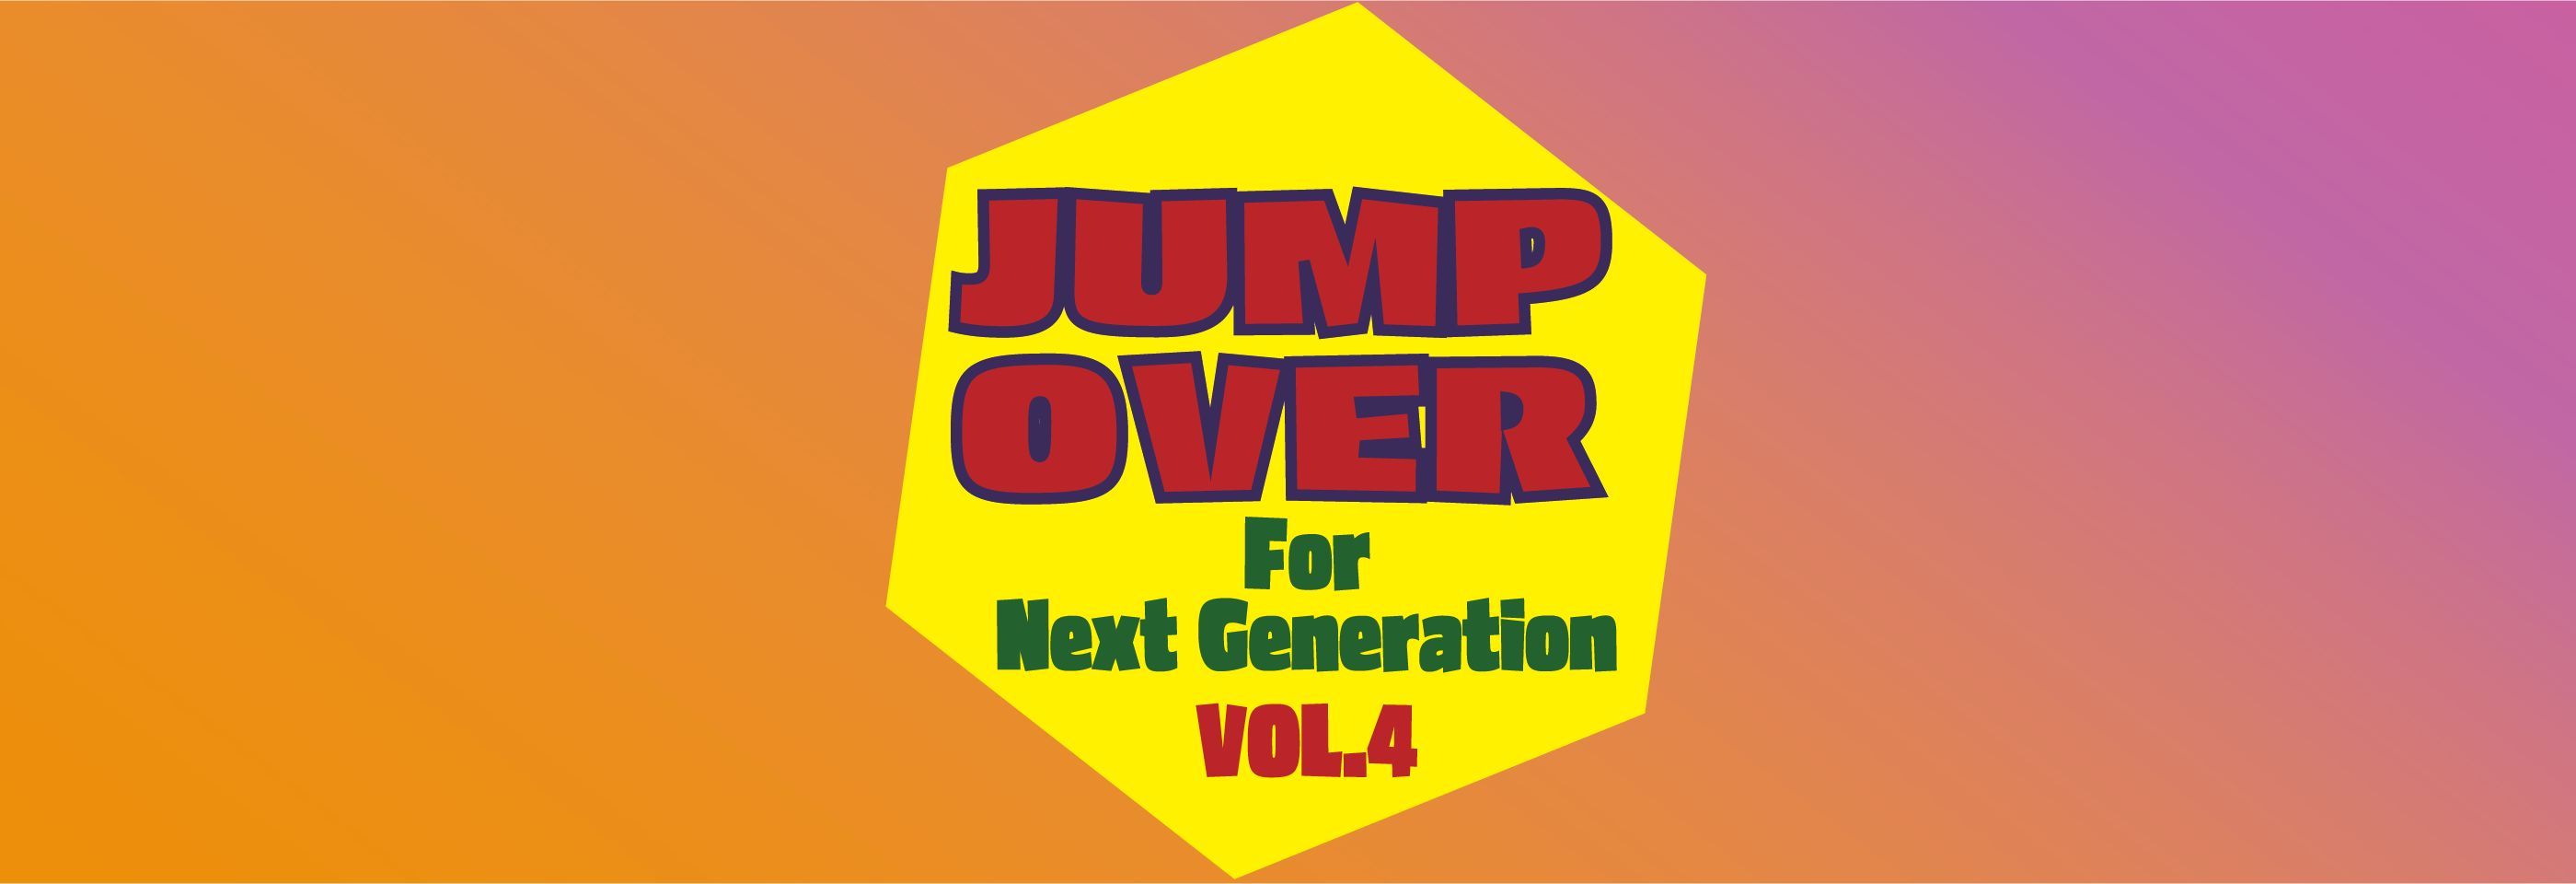 【JUMP OVER vol.4】for Next Generation